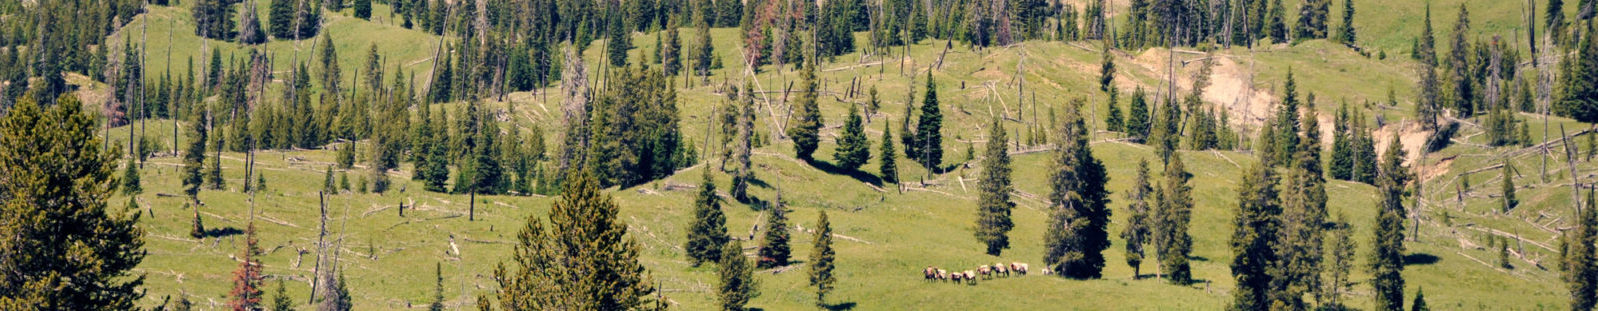 Horses in Forest - Horse pack trips in Yellowstone